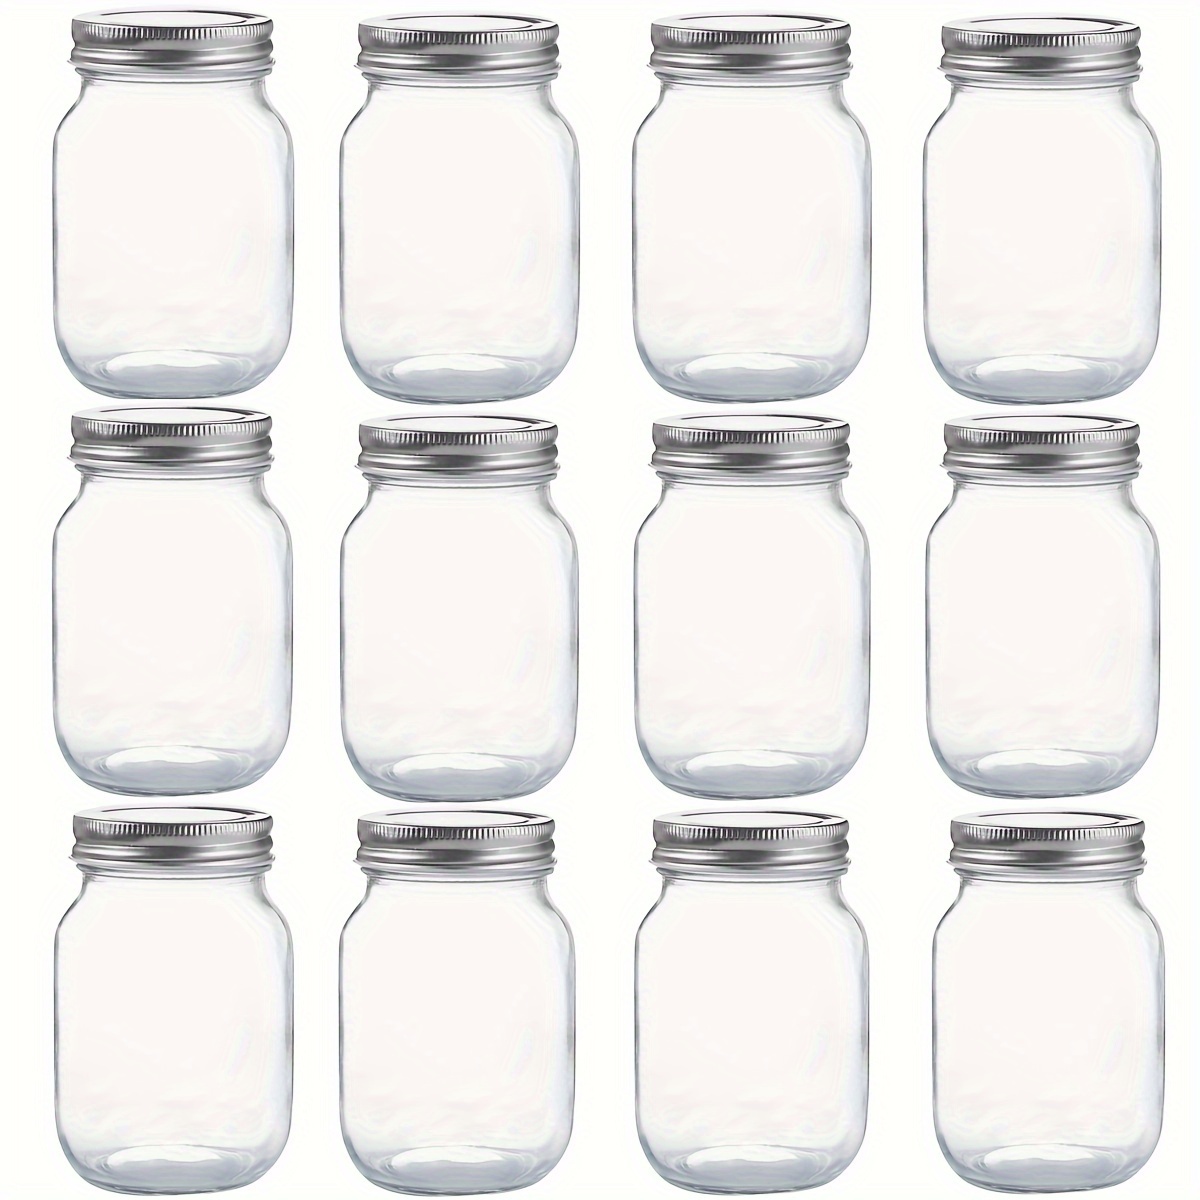 6 Pack 16 Oz. Mason Jar Mugs with Handle, Tin Lid and Plastic Straws - Old  Fashion Drinking Glasses for Party or Daily Use - China Mason Jars with  Lids and Straws